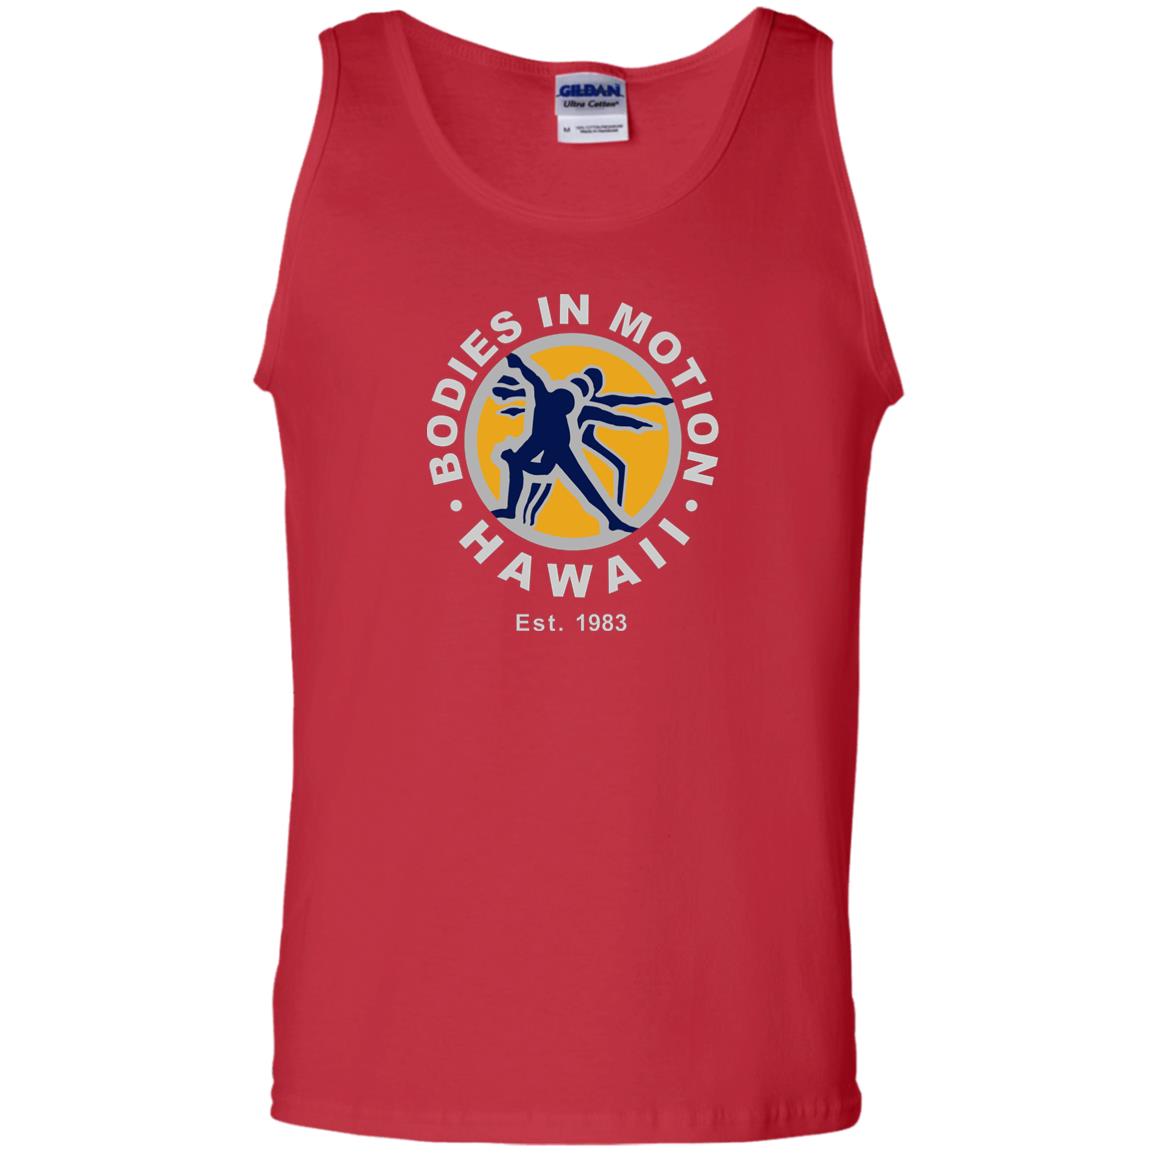 Bodies in Motion Cotton Tank Top